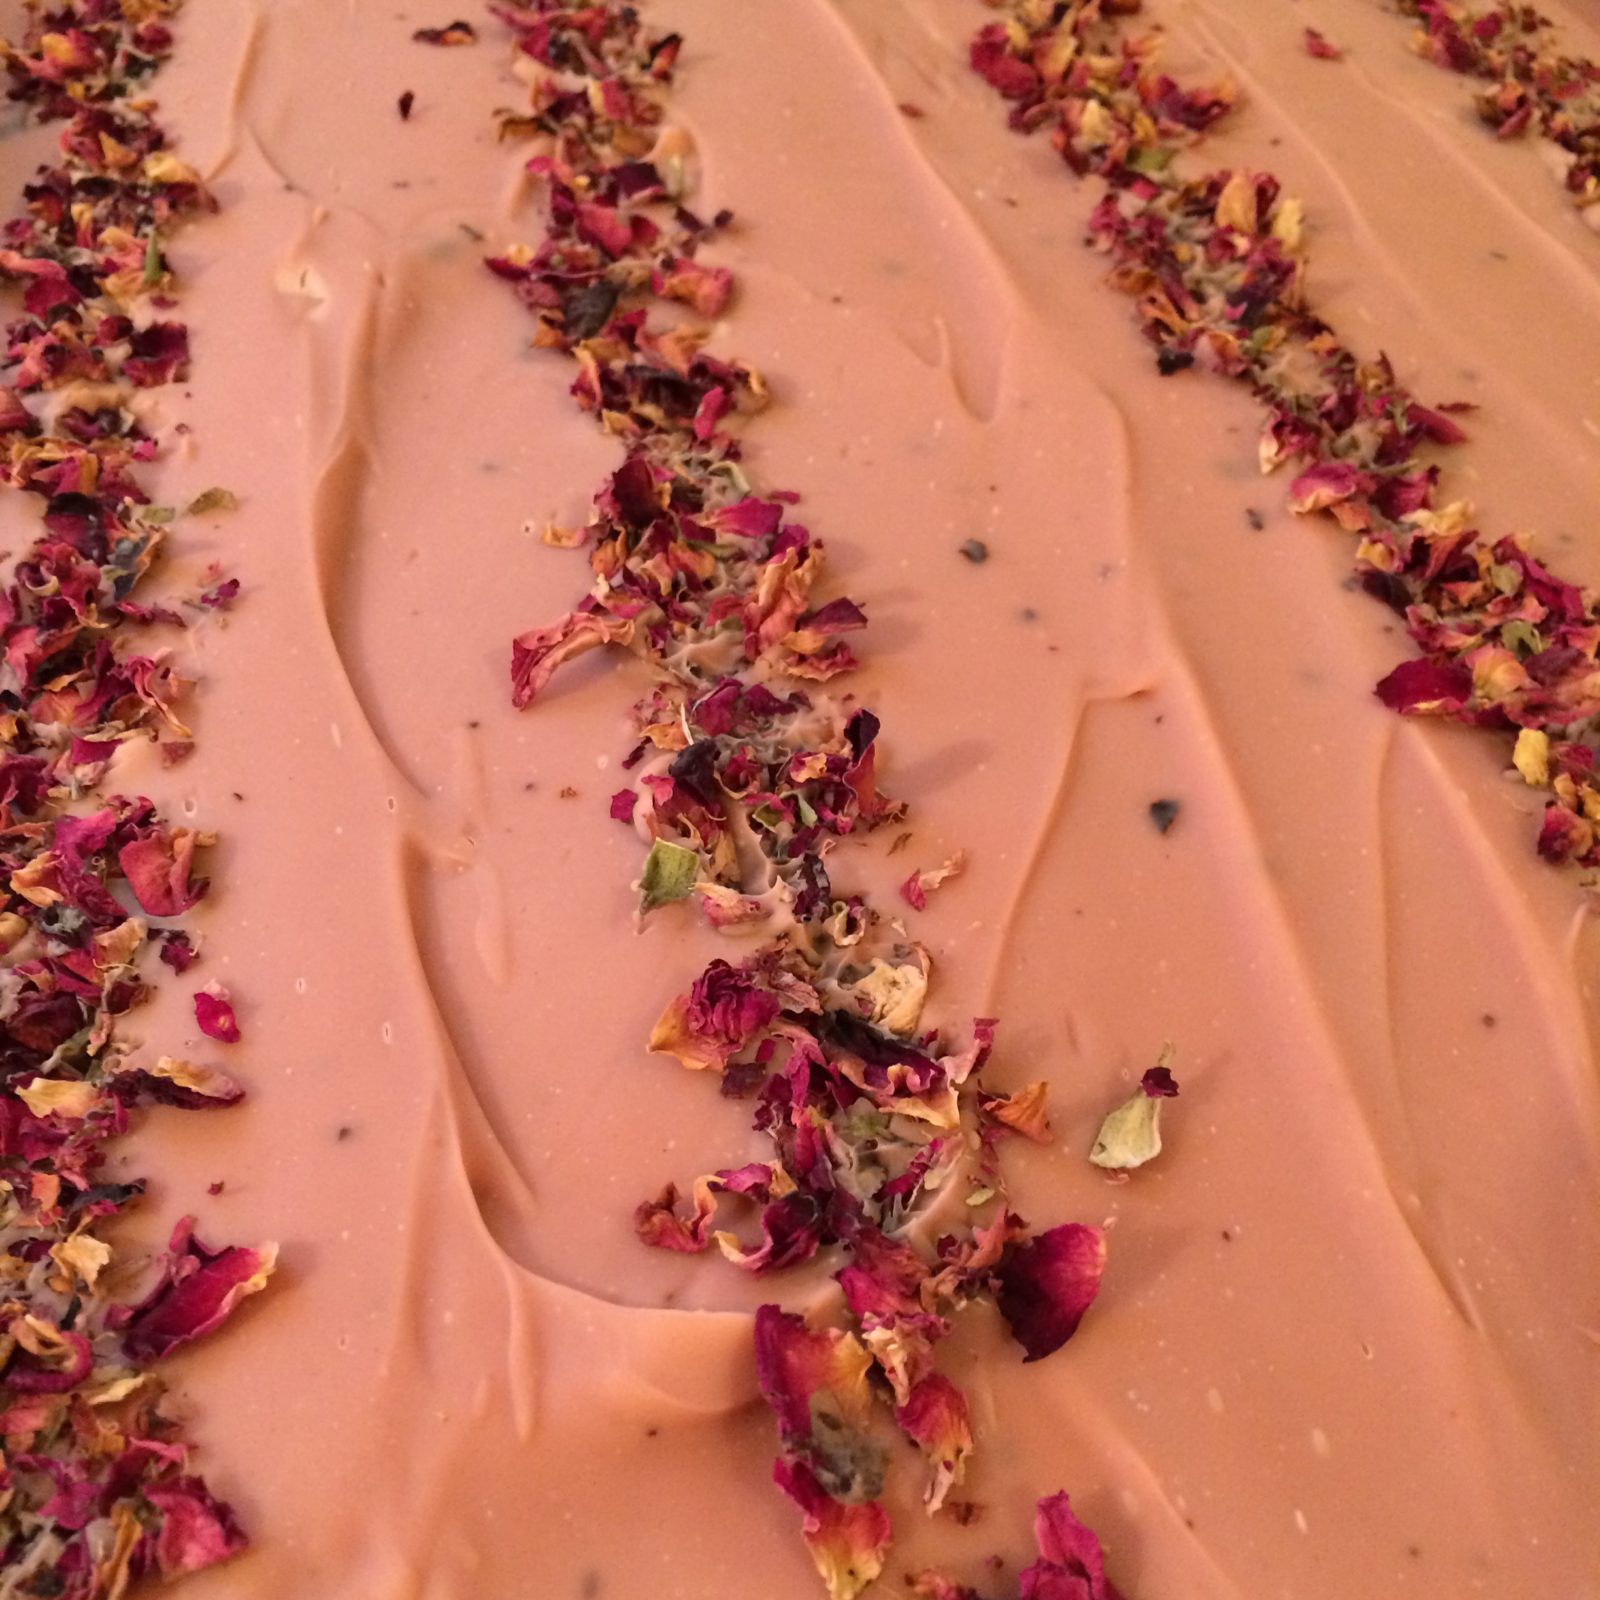 Rose colored custom soaps made by old factory in blanco texas